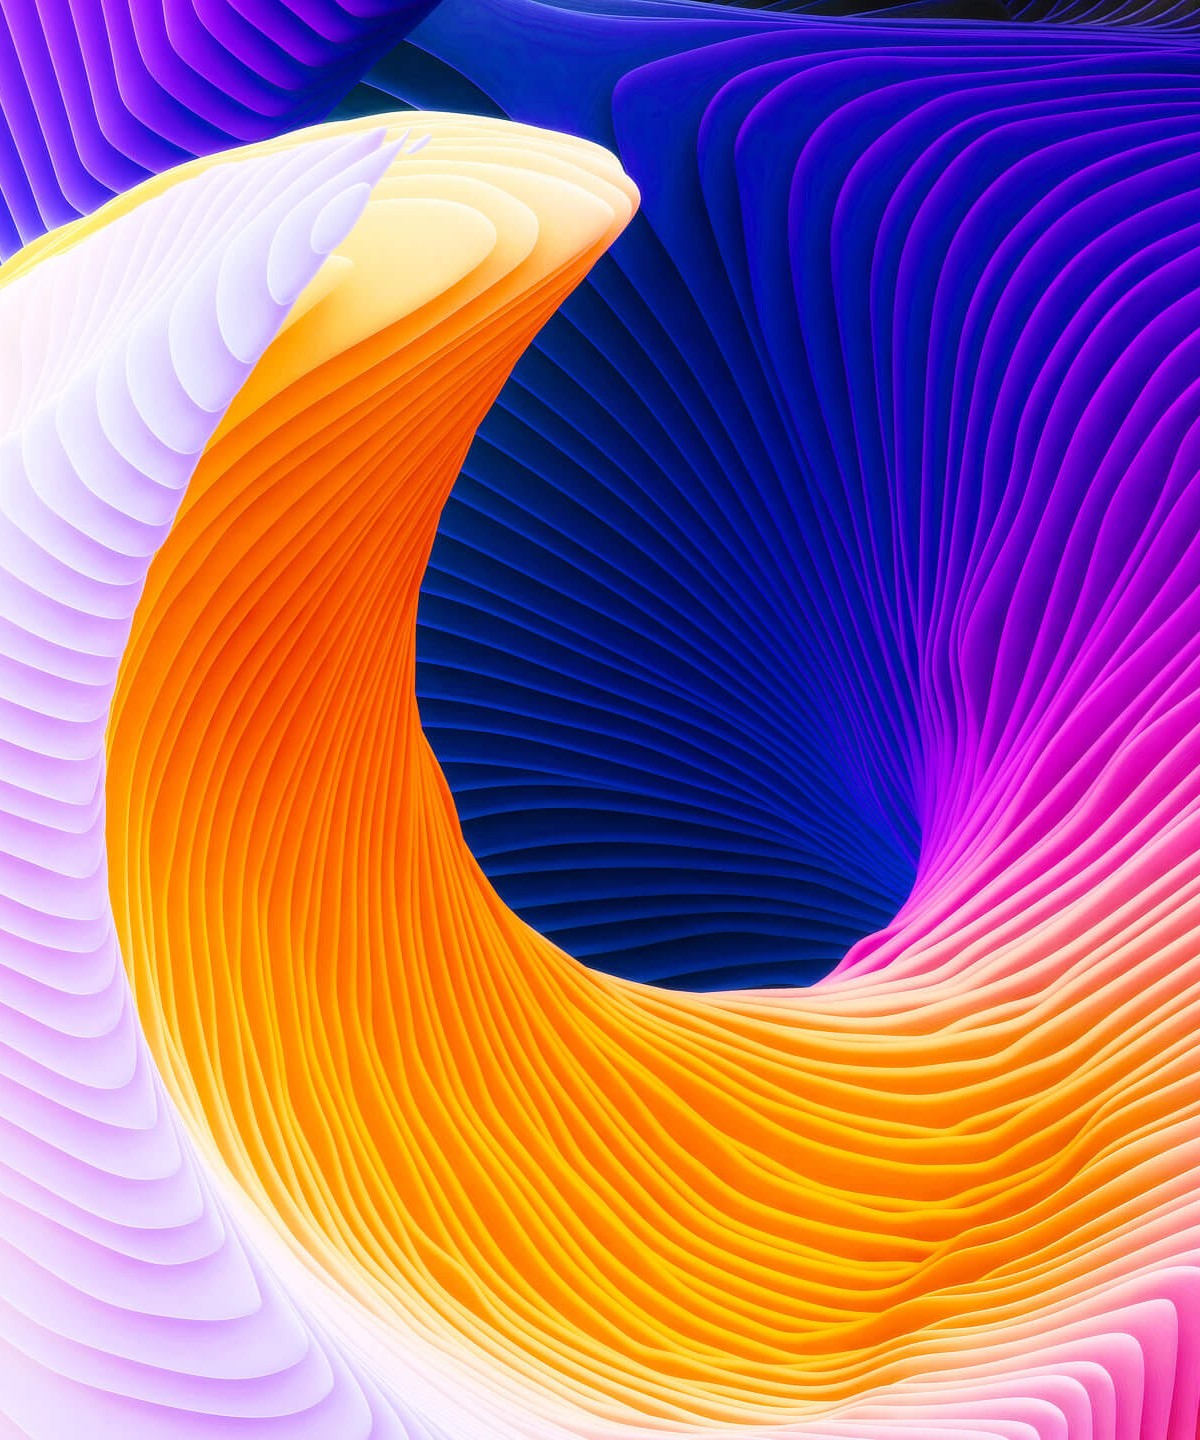 Colorful Spiral HD Wallpaper For Kindle Fire HDx HDwallpaper